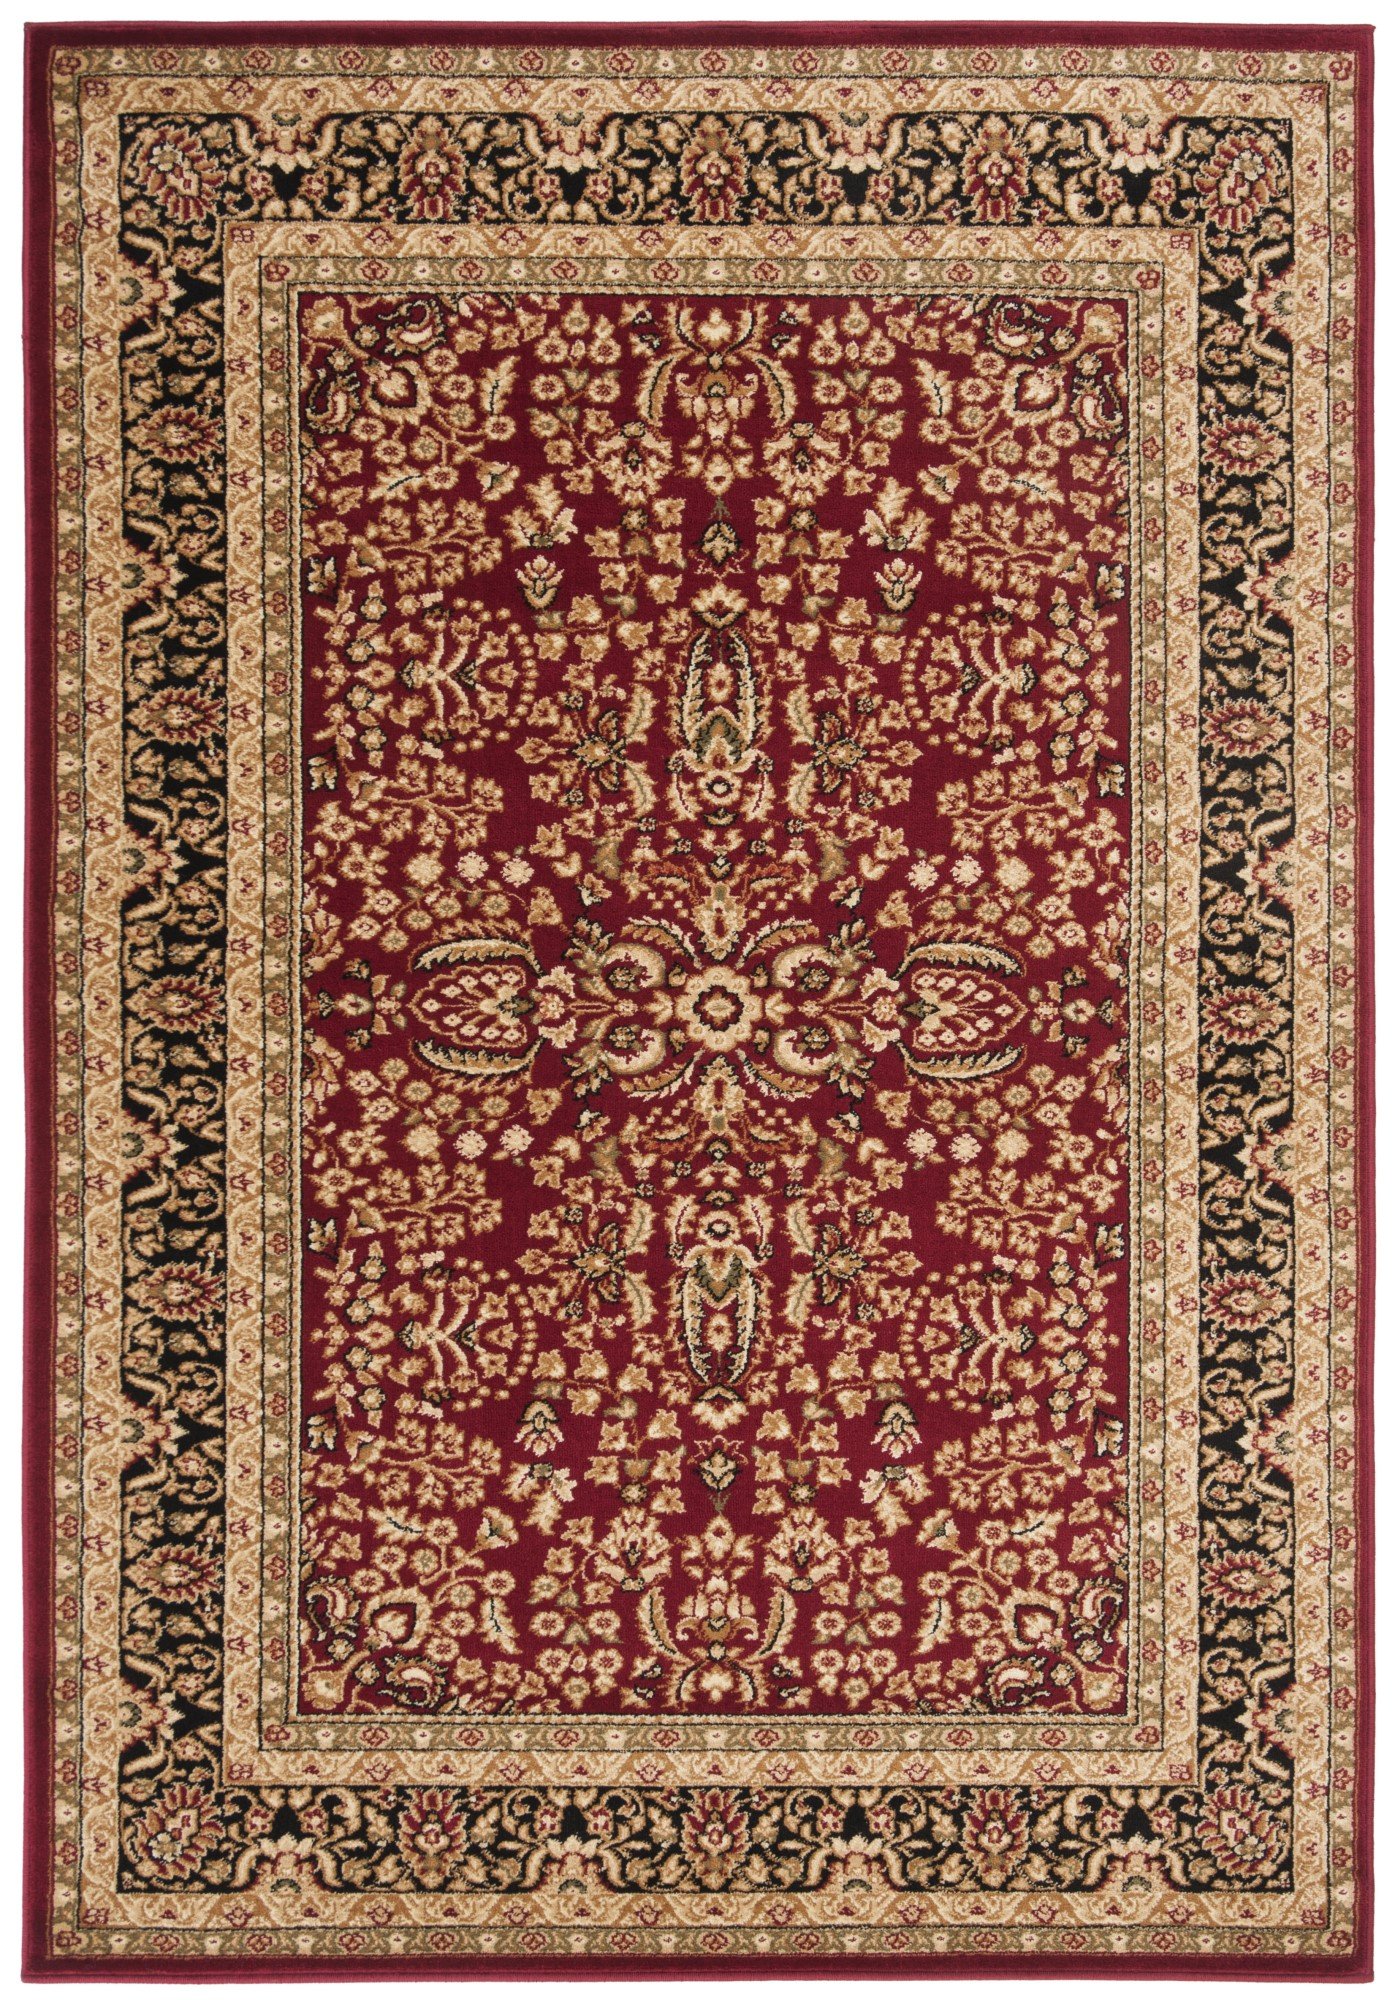 Ivory SAFAVIEH Lyndhurst Collection LNH316B Traditional Oriental Non-Shedding Living Room Bedroom Dining Home Office Area Rug Black 9' x 12' 